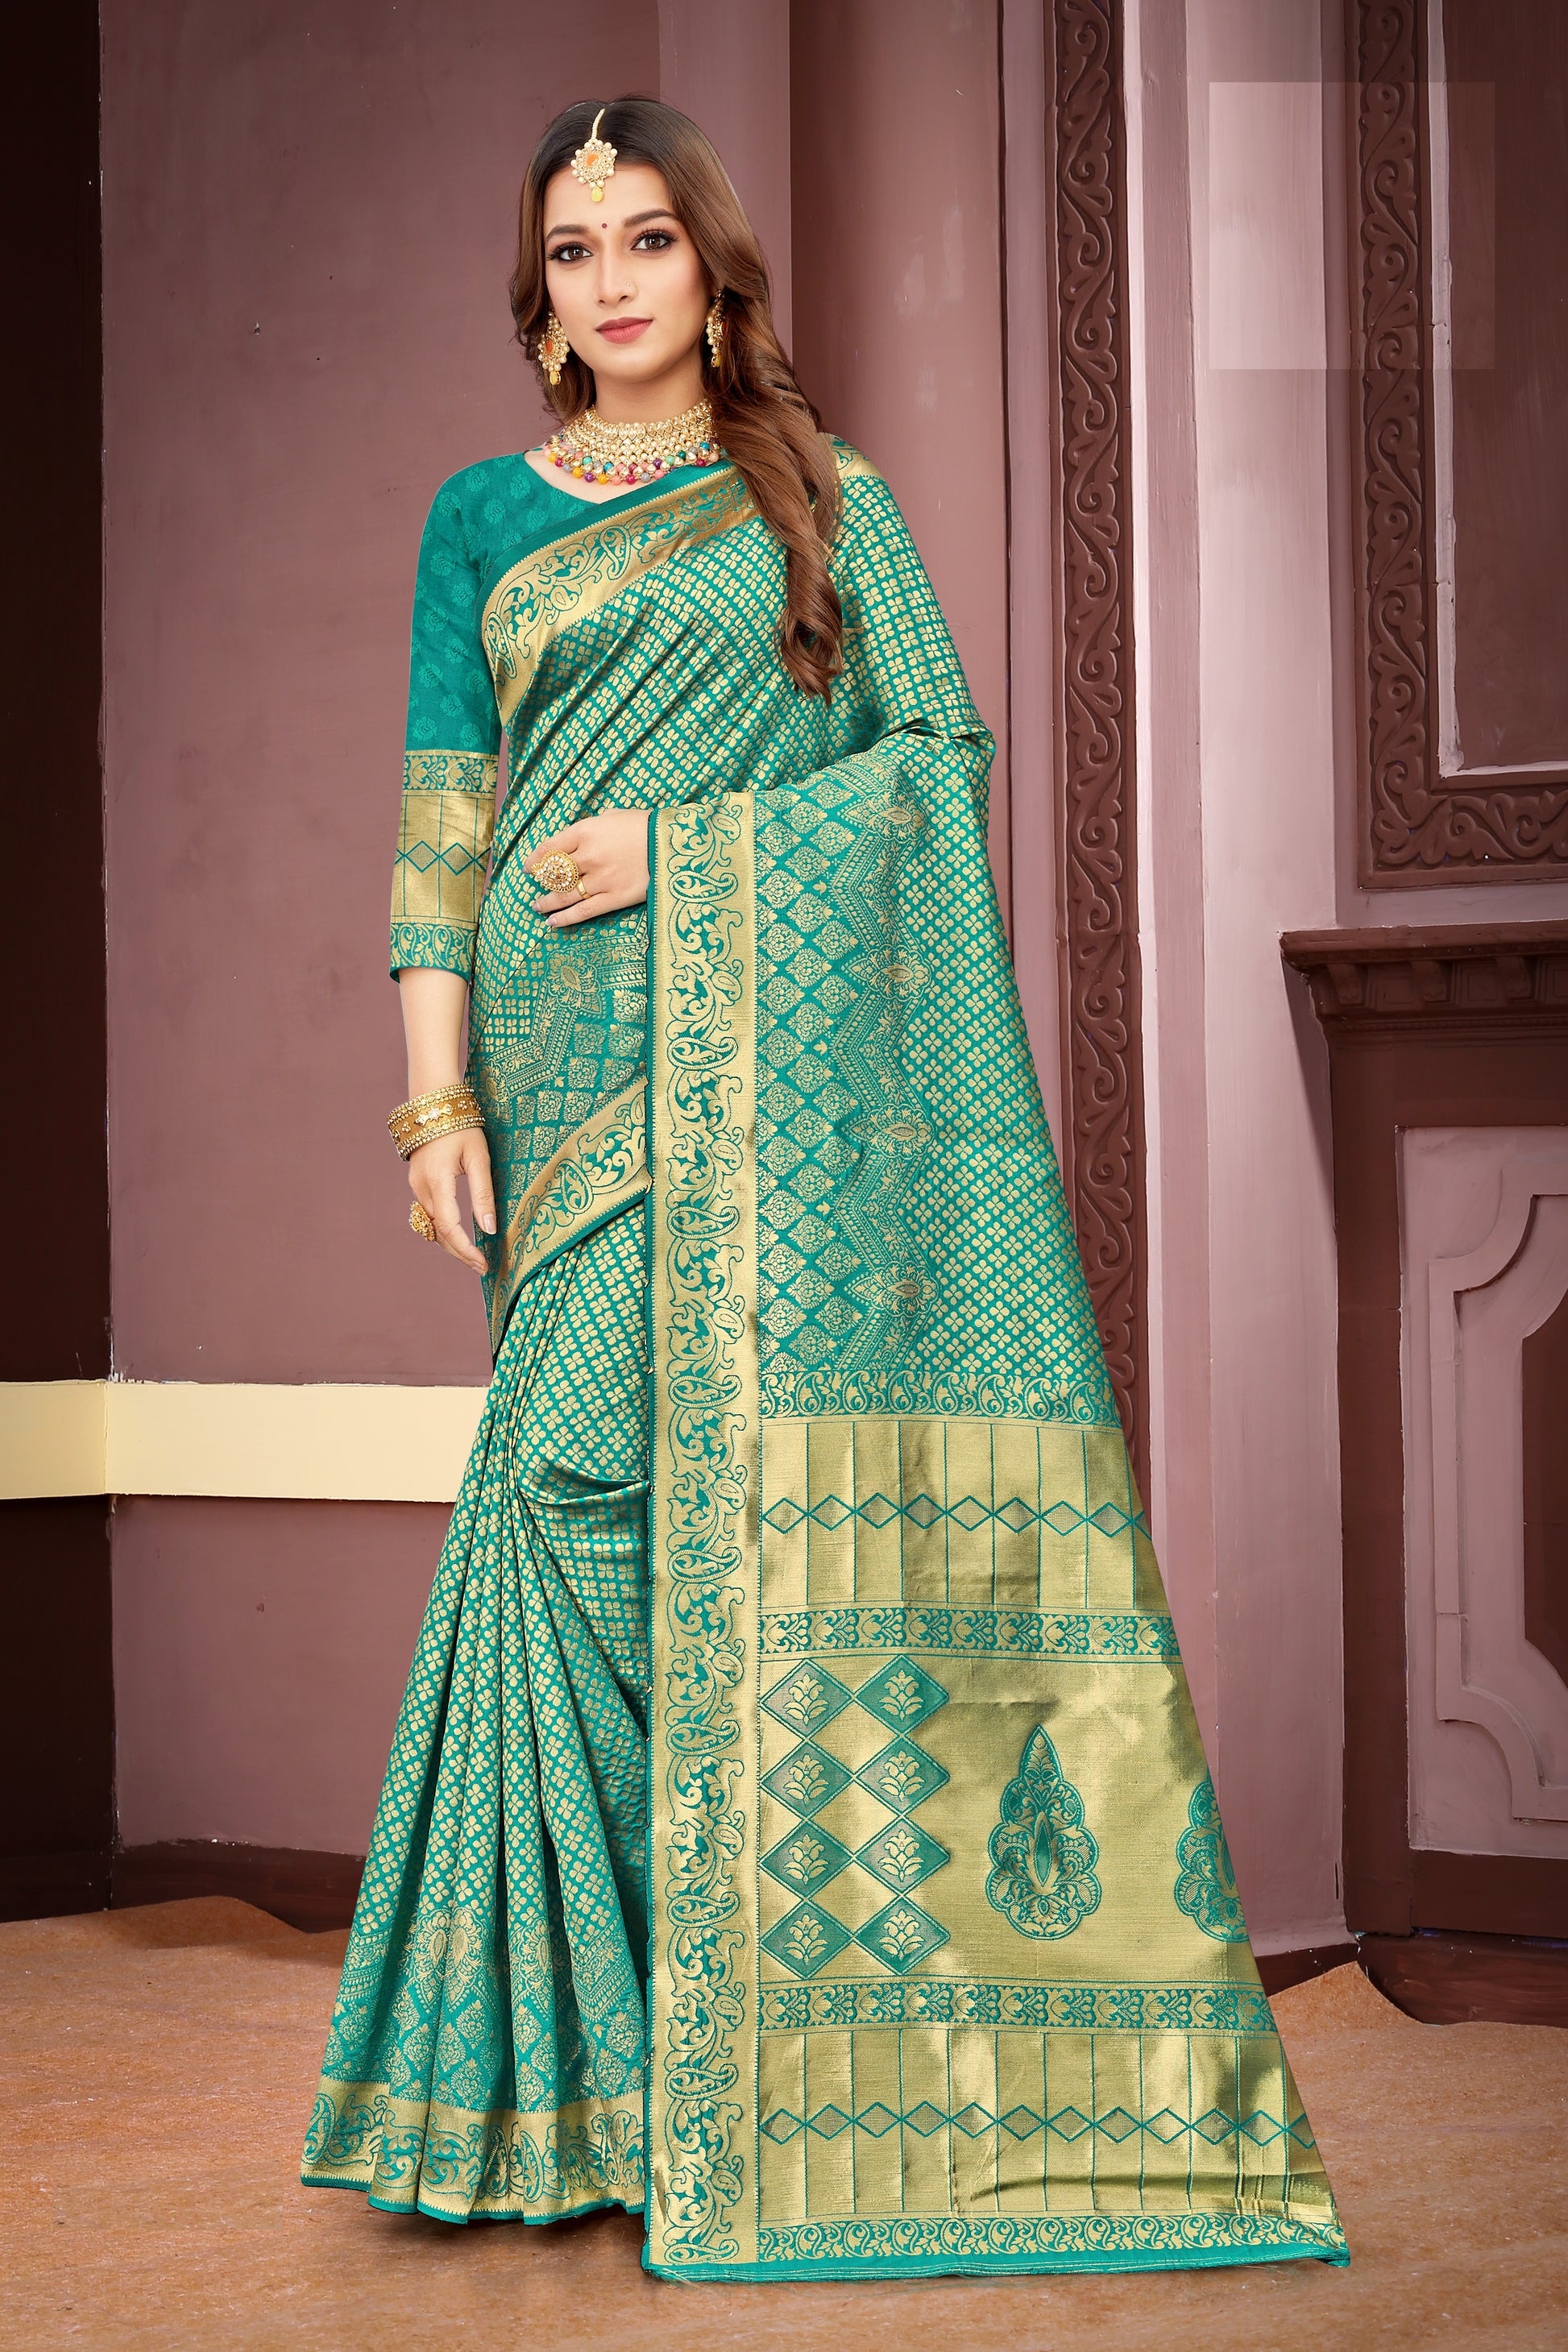 FASHION BOOMS RAMA BANARSI SILK TRADITIONAL SAREE WITH 7 OTHER COLORS FOR WHOLE FAMILY TO WEAR ON ANY OCCASION .